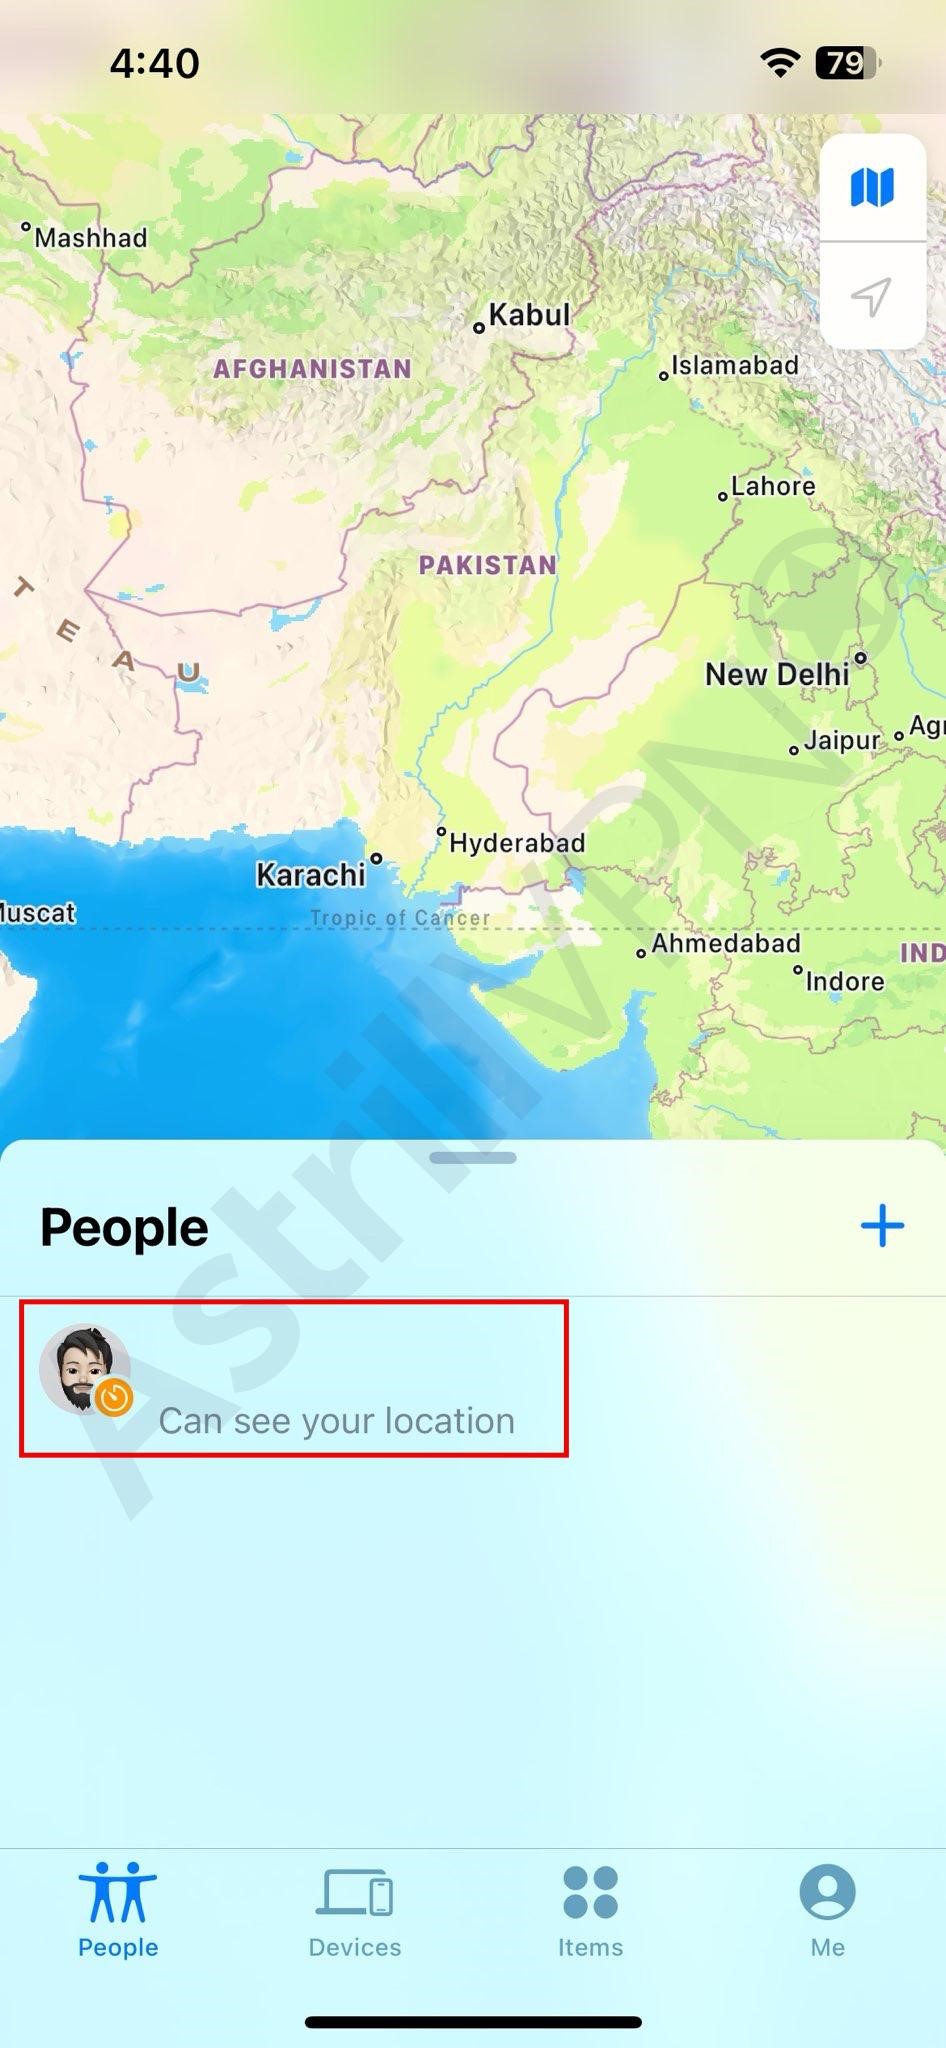 person’s name you want to stop sharing your location 